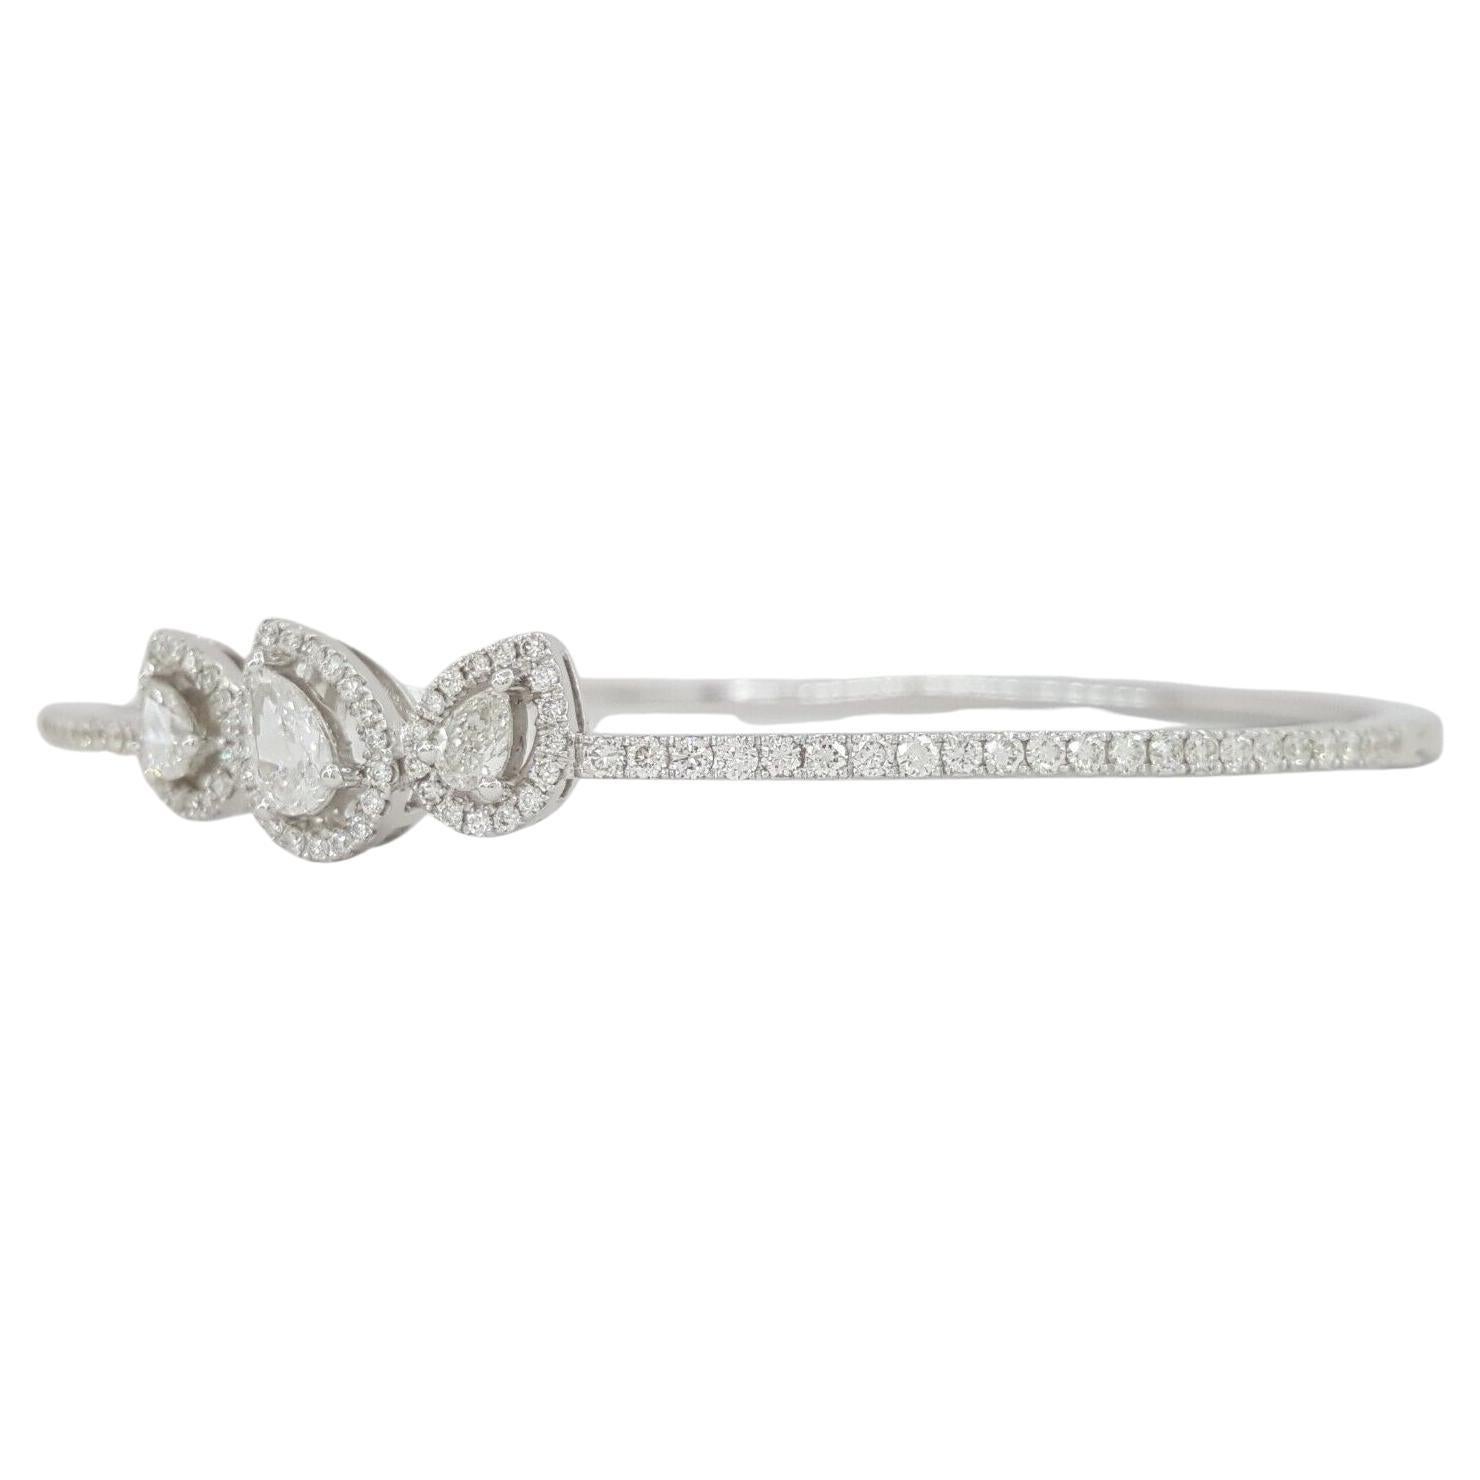 1.18 ct total weight Pear & Round Brilliant Cut Diamond Straight Line Station Bangle Bracelet 18K White Gold. 



